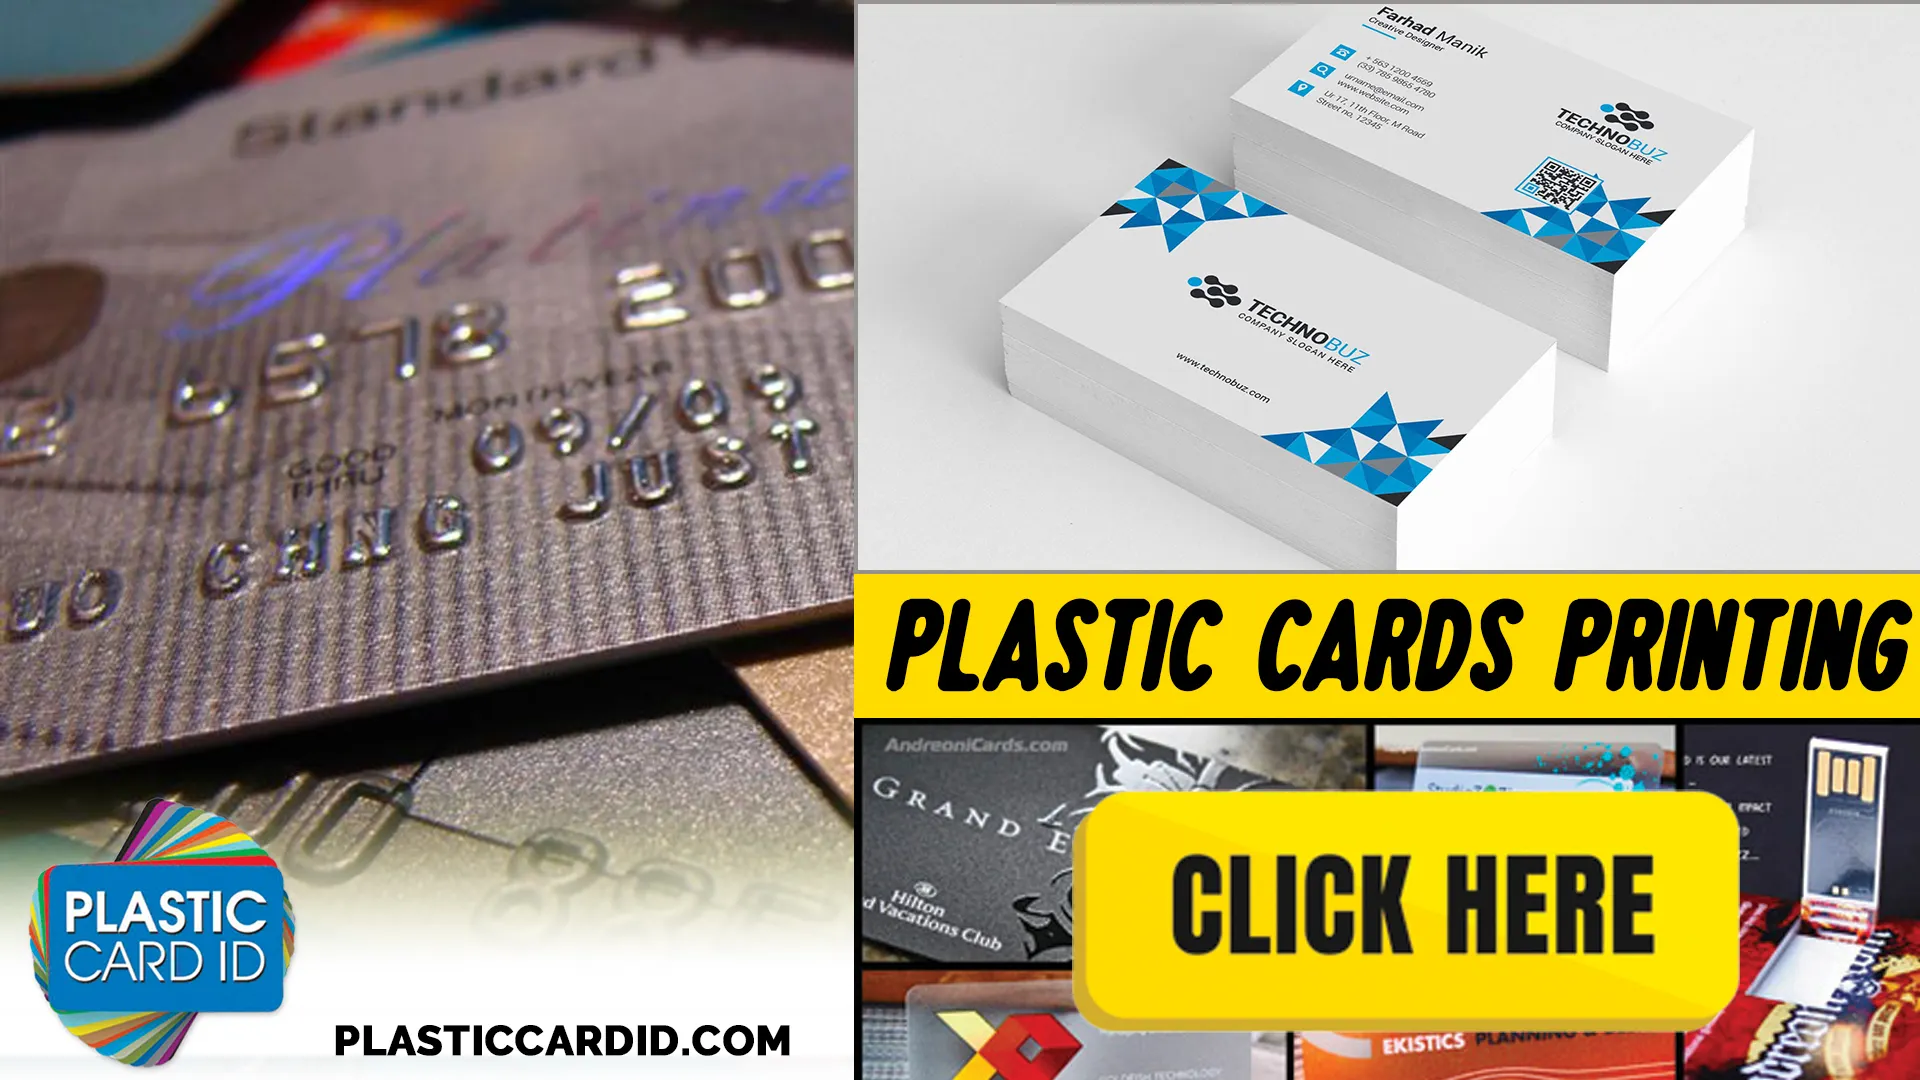 Welcome to the World of Personalized Rewards at Plastic Card ID




